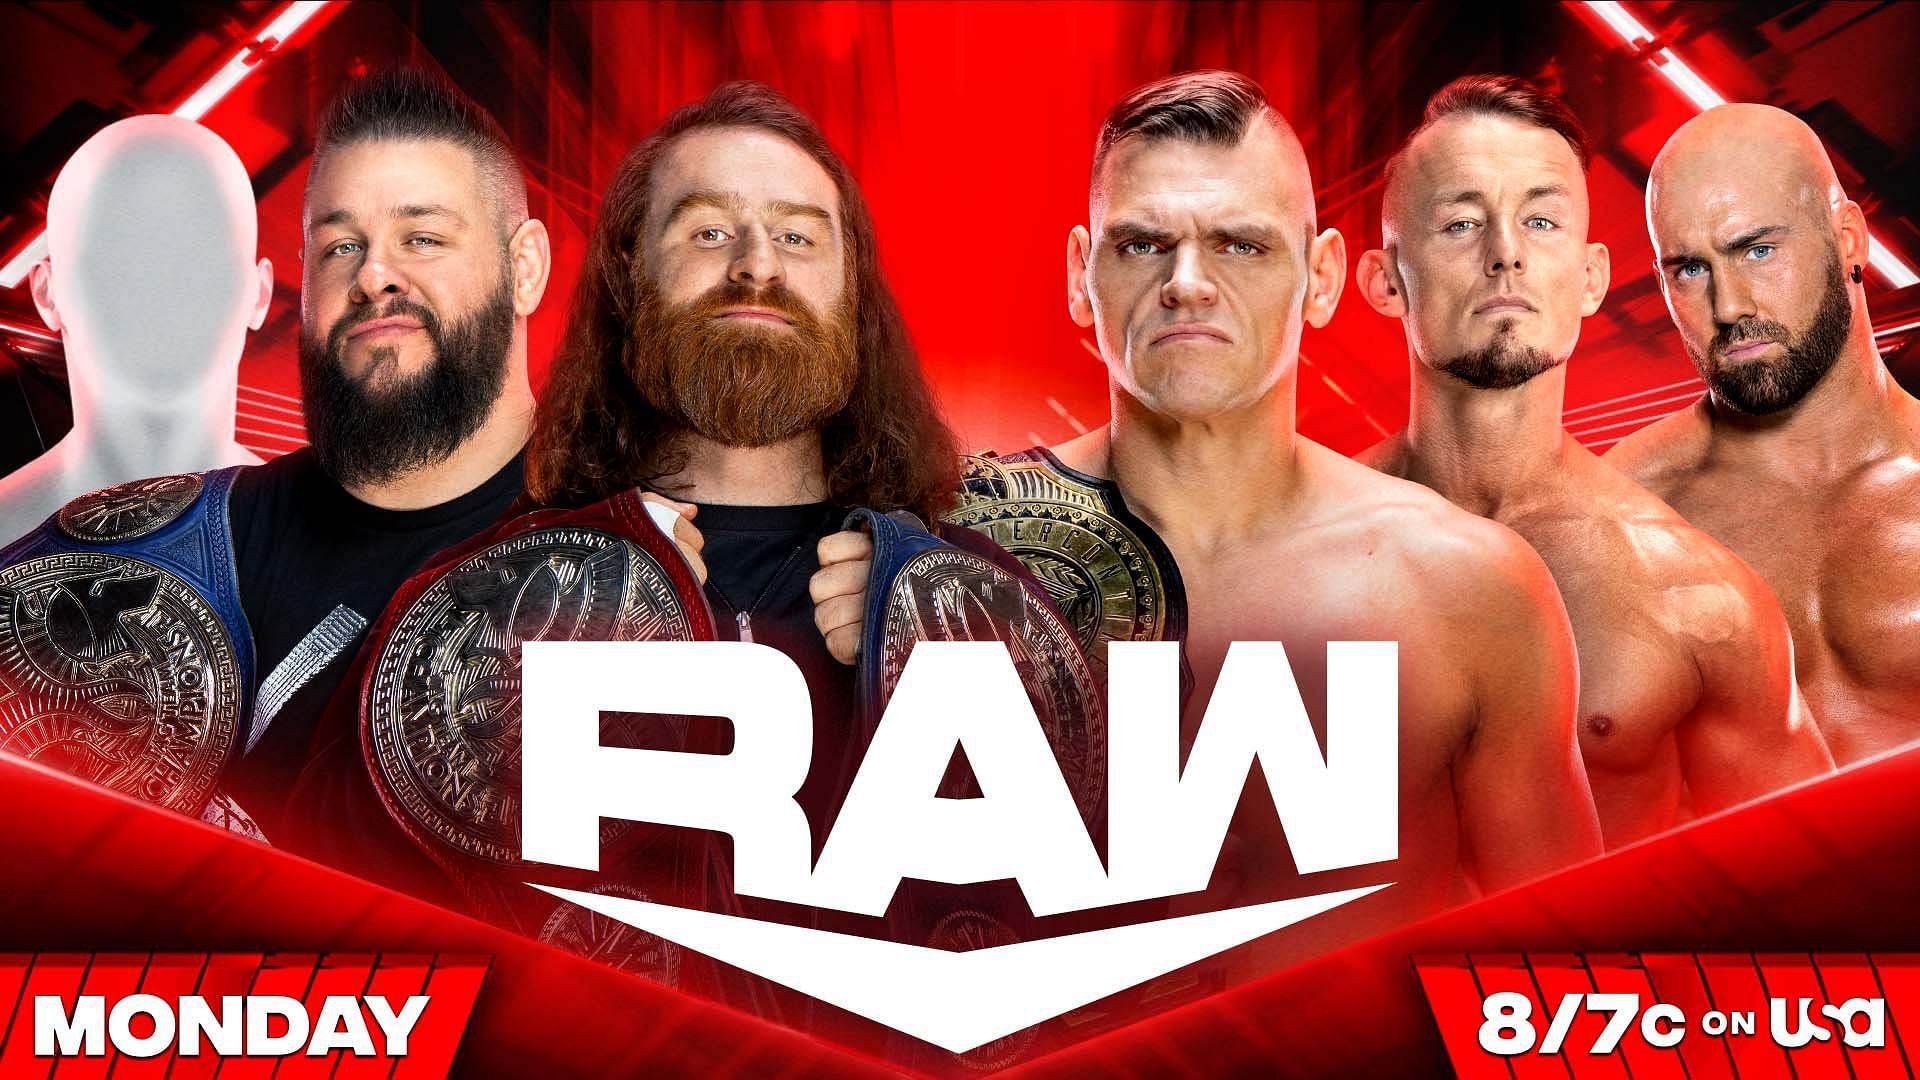 Several big surprises could happen on the upcoming edition of WWE RAW